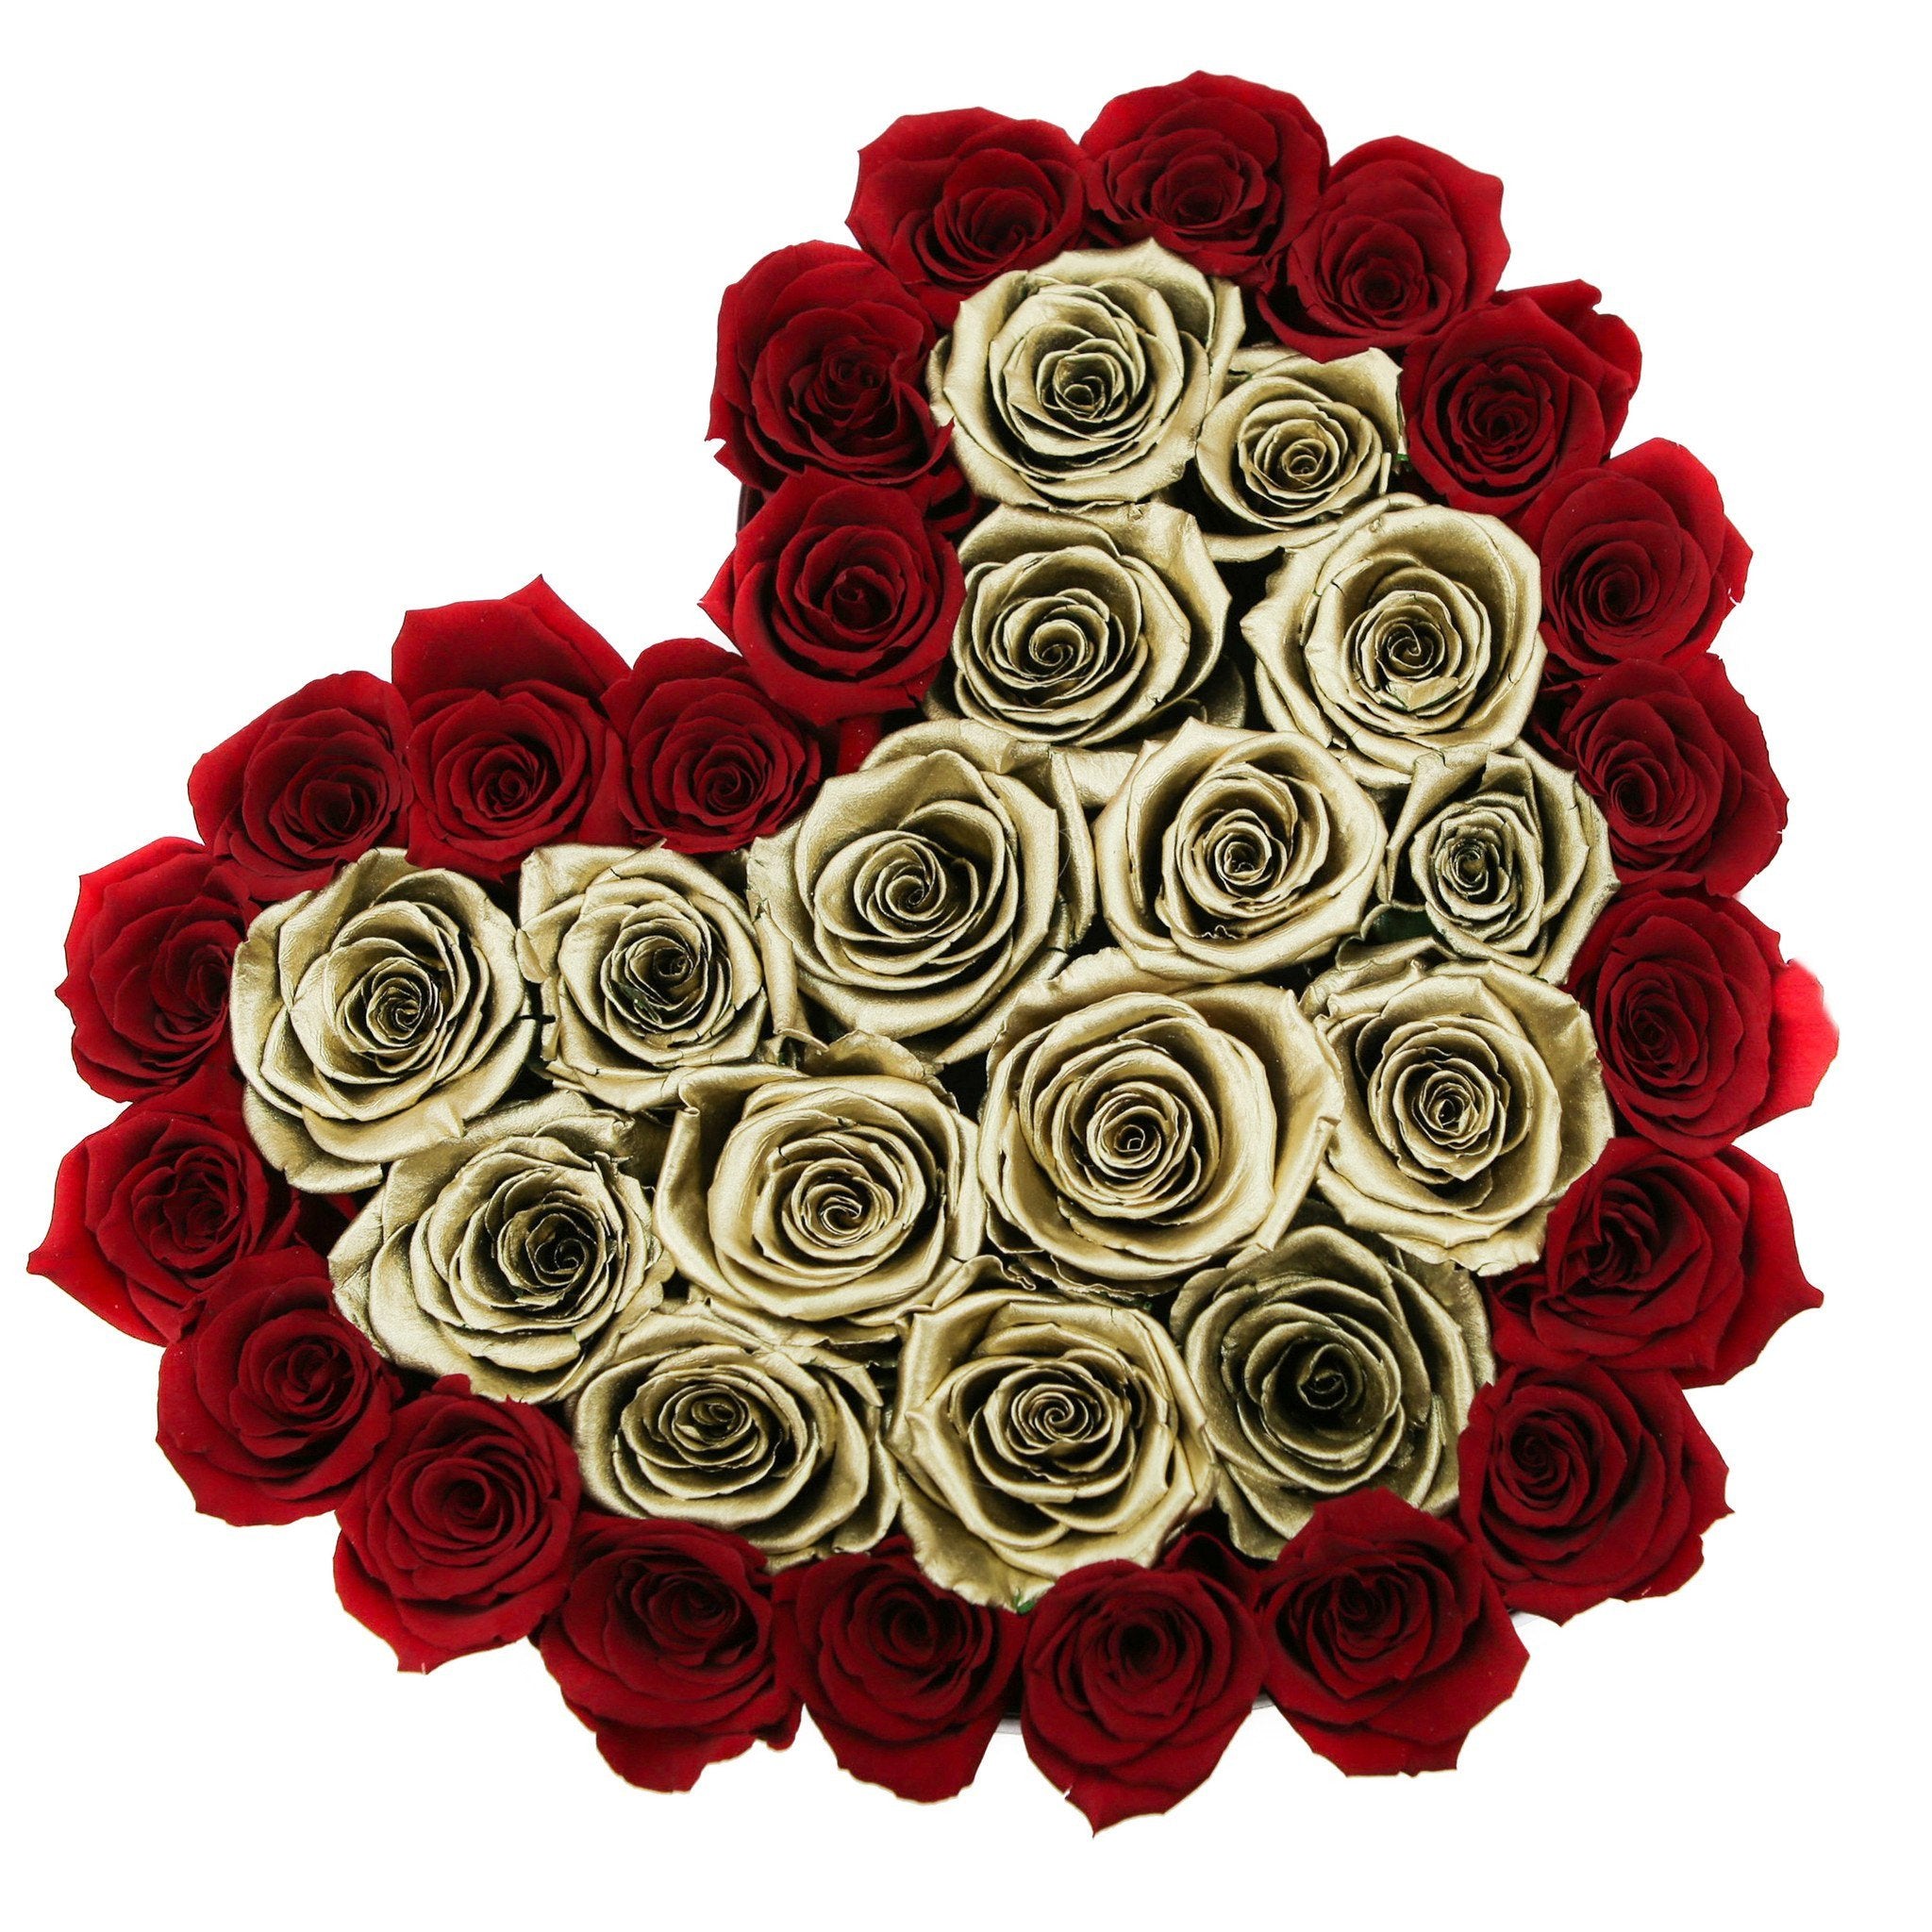 LOVE box - white - red&gold roses mixed eternity roses - the million roses